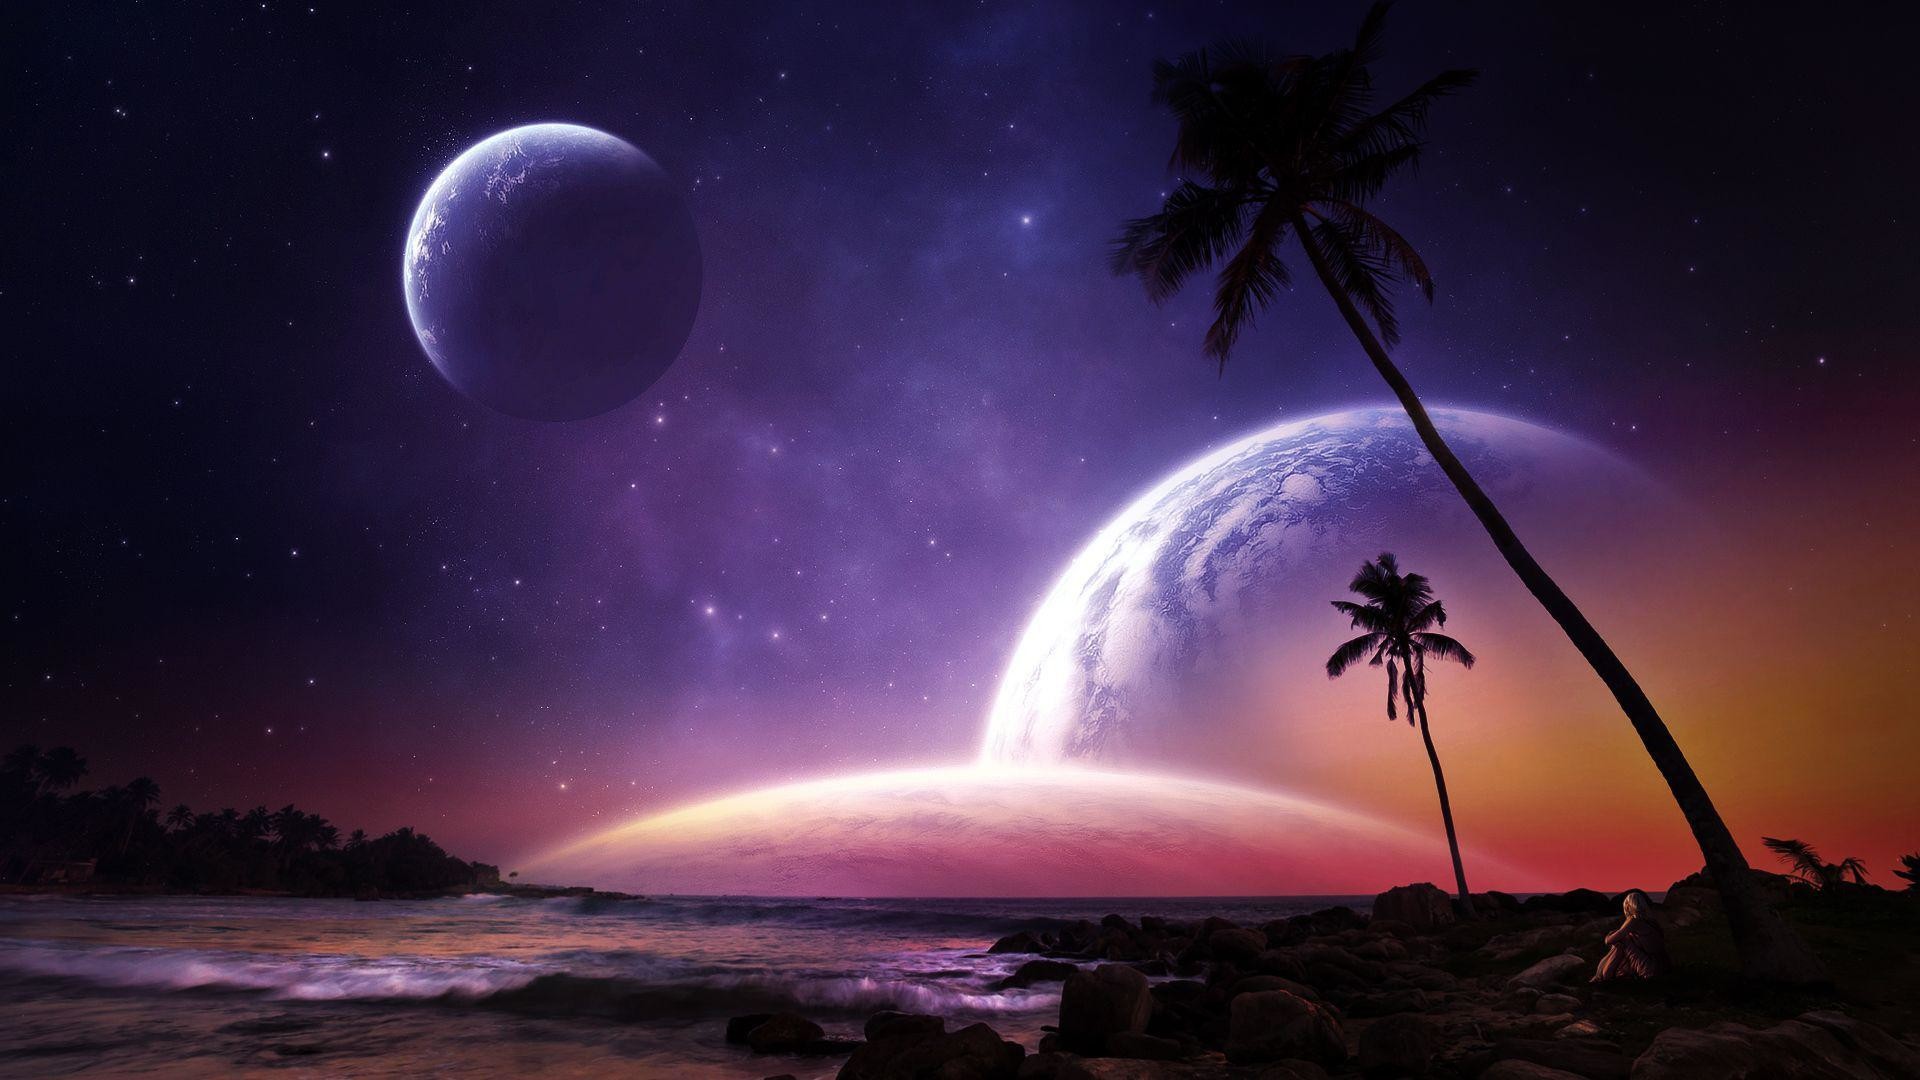 1920x1080 Planets, On, The, Night, Sky, Above, The, Beach, Full, Screen, Hd, Wallpaper,  Amazing, Colors, Wallpapers For Large Screens, 1920Ã1080 Wallpaper HD